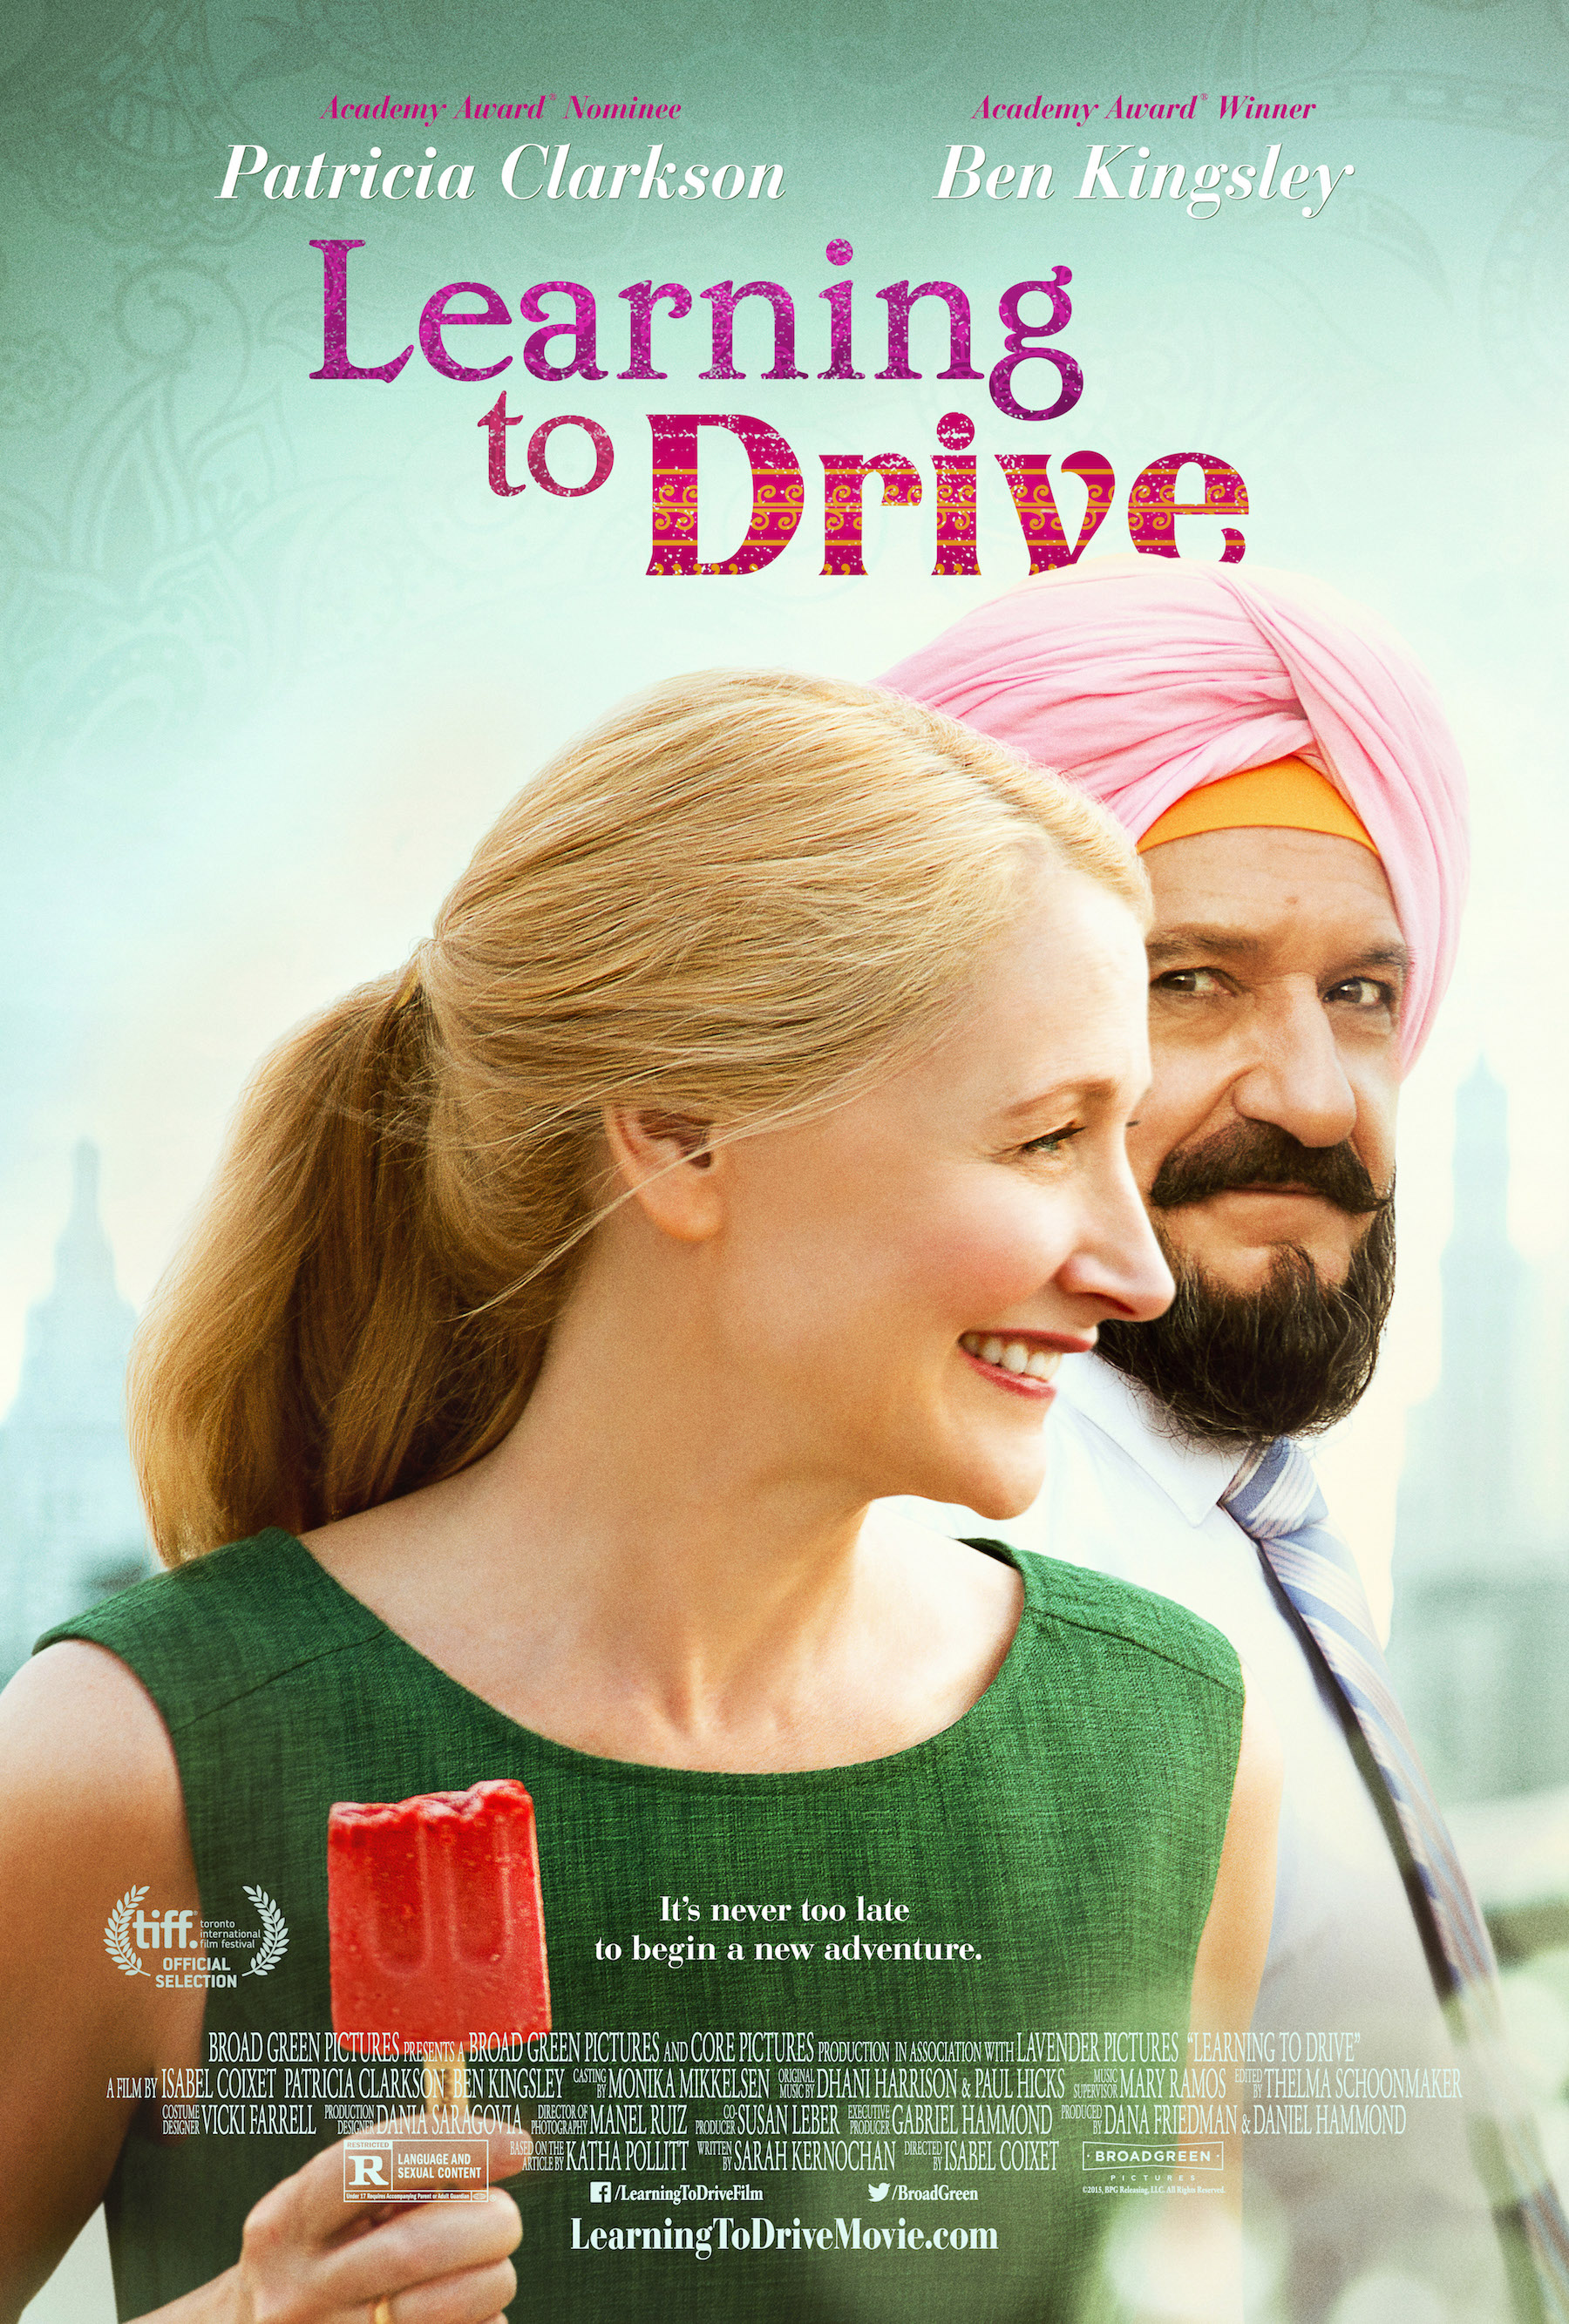 Ben Kingsley and Patricia Clarkson in Learning to Drive (2014)